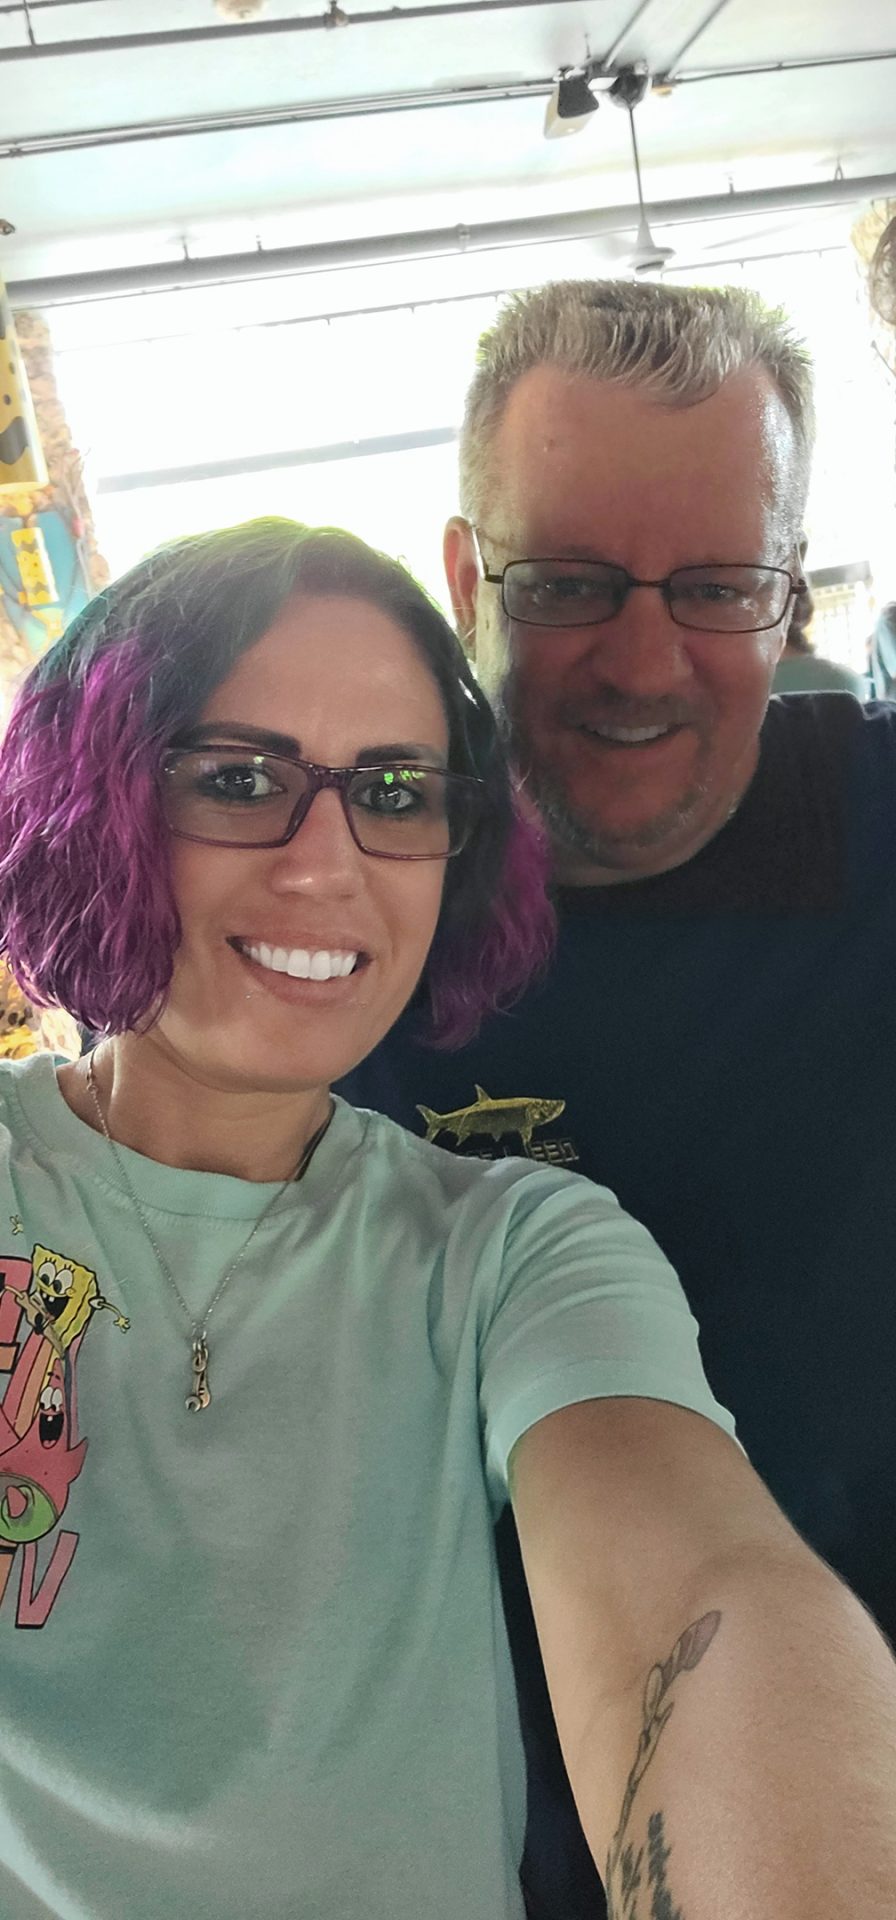 Uncle Danny and I at Busch Gardens, we had such a blast and he was super stoked to ride the roller coasters! June 11, 2022.